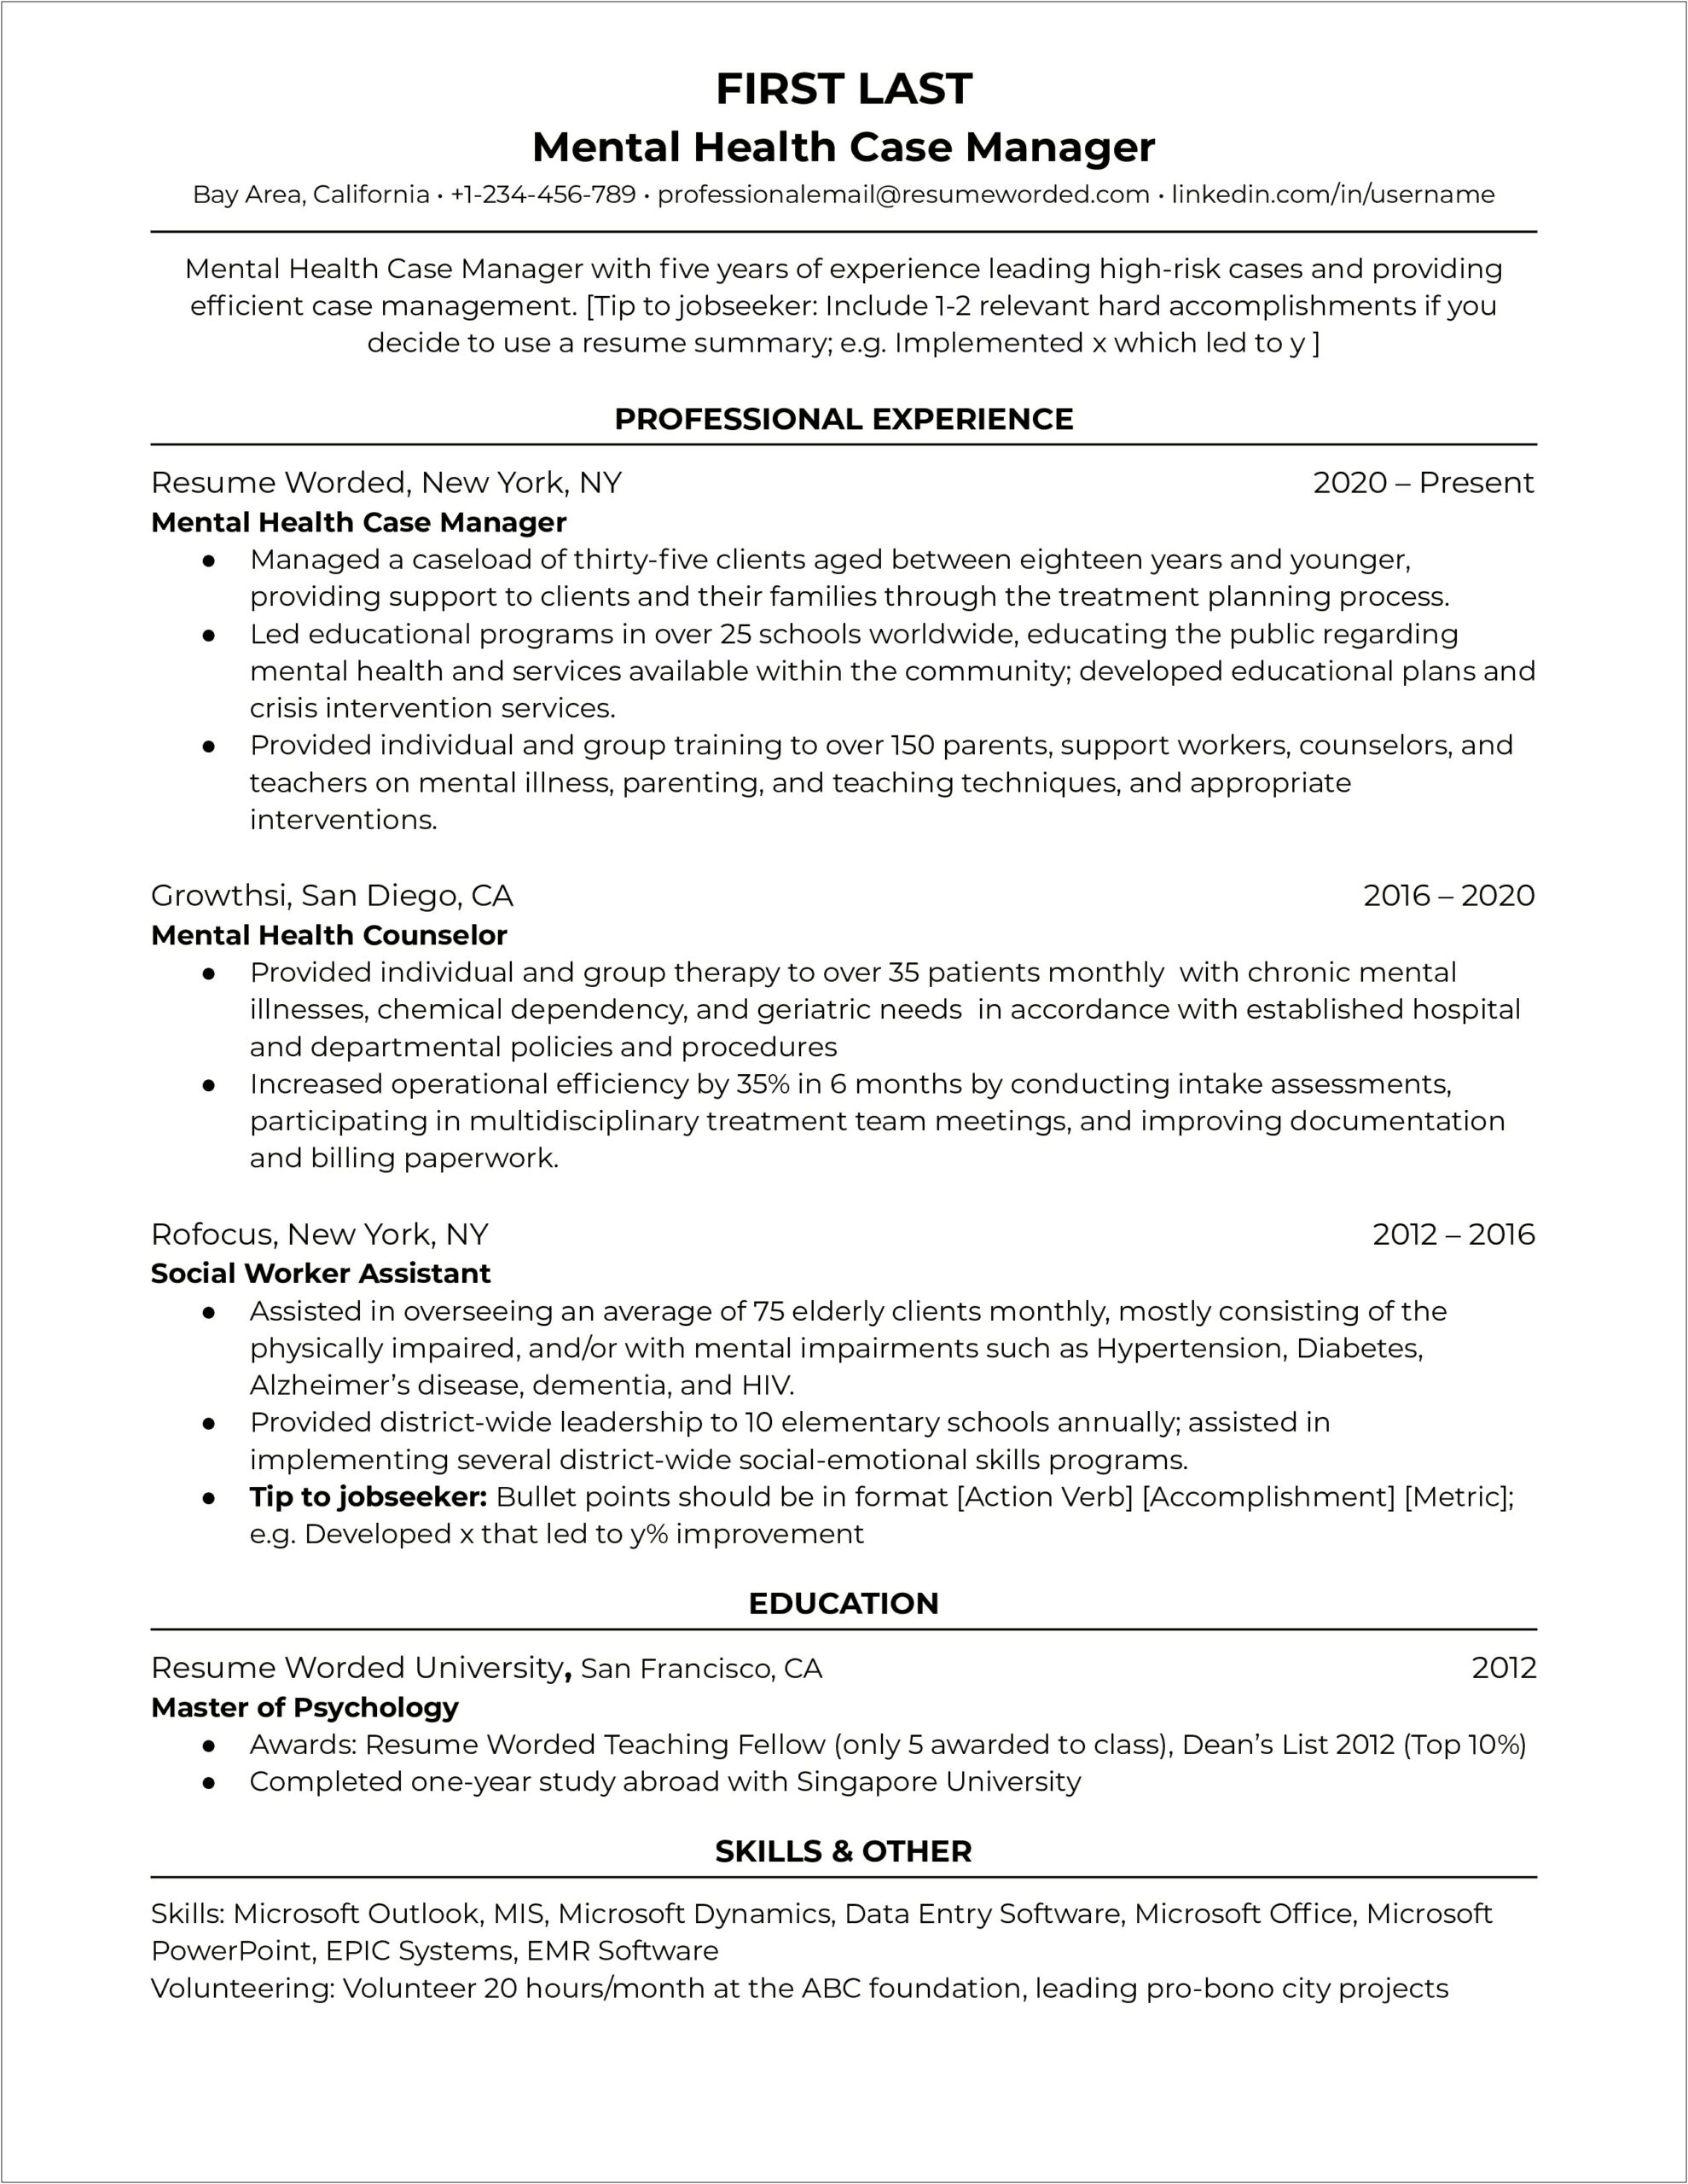 Clinical Mental Health Counseling Sample Resume